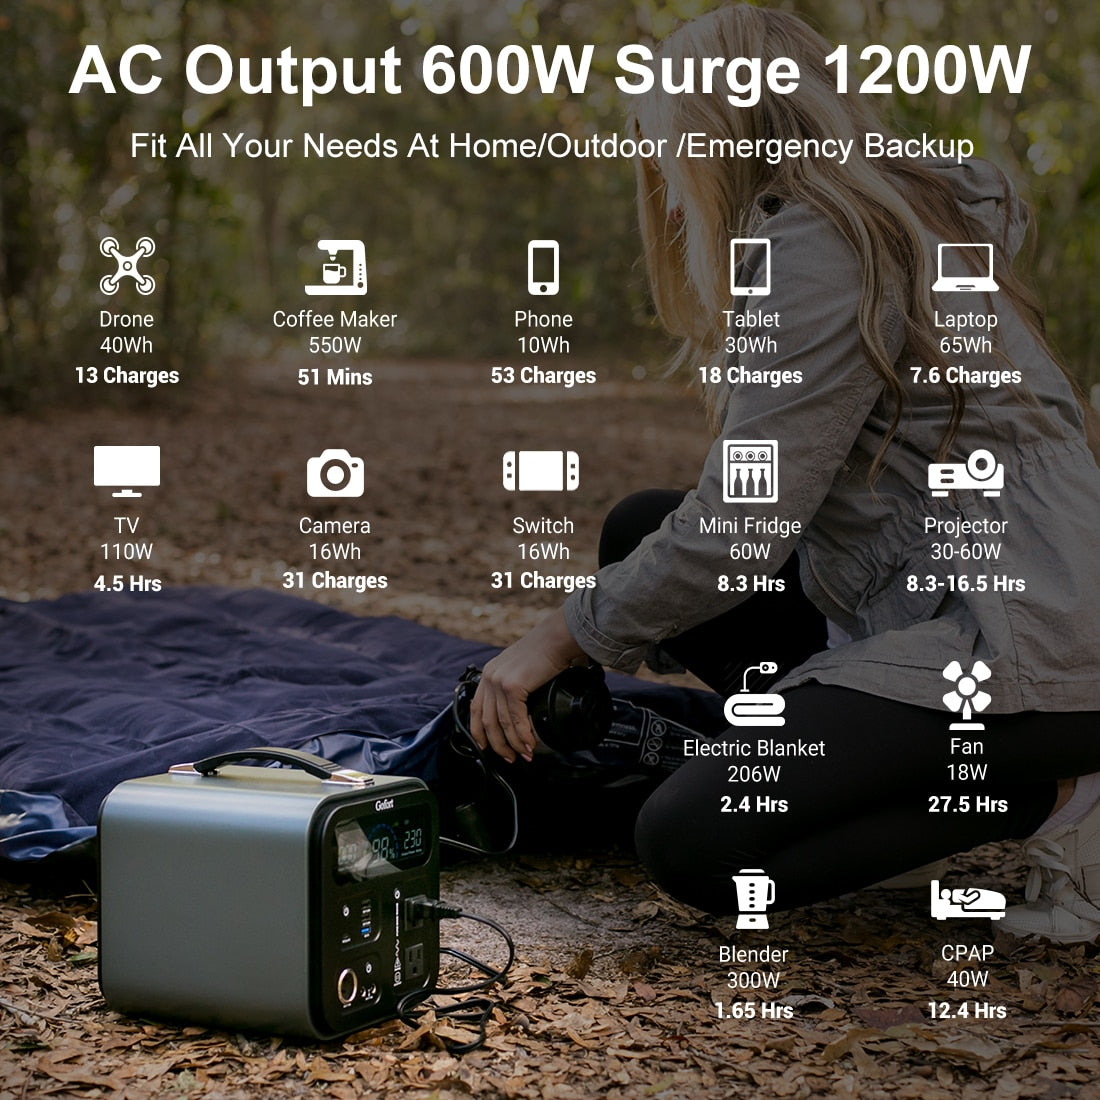 AC Output 60OW Surge 1200W Fit All Your Need